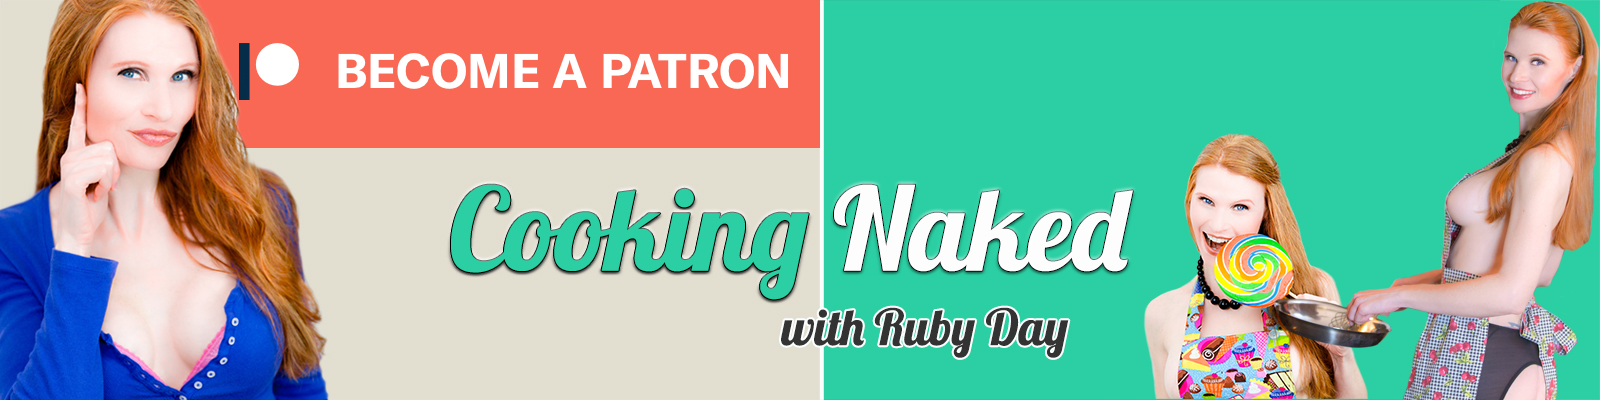 Patreon ruby day Find out